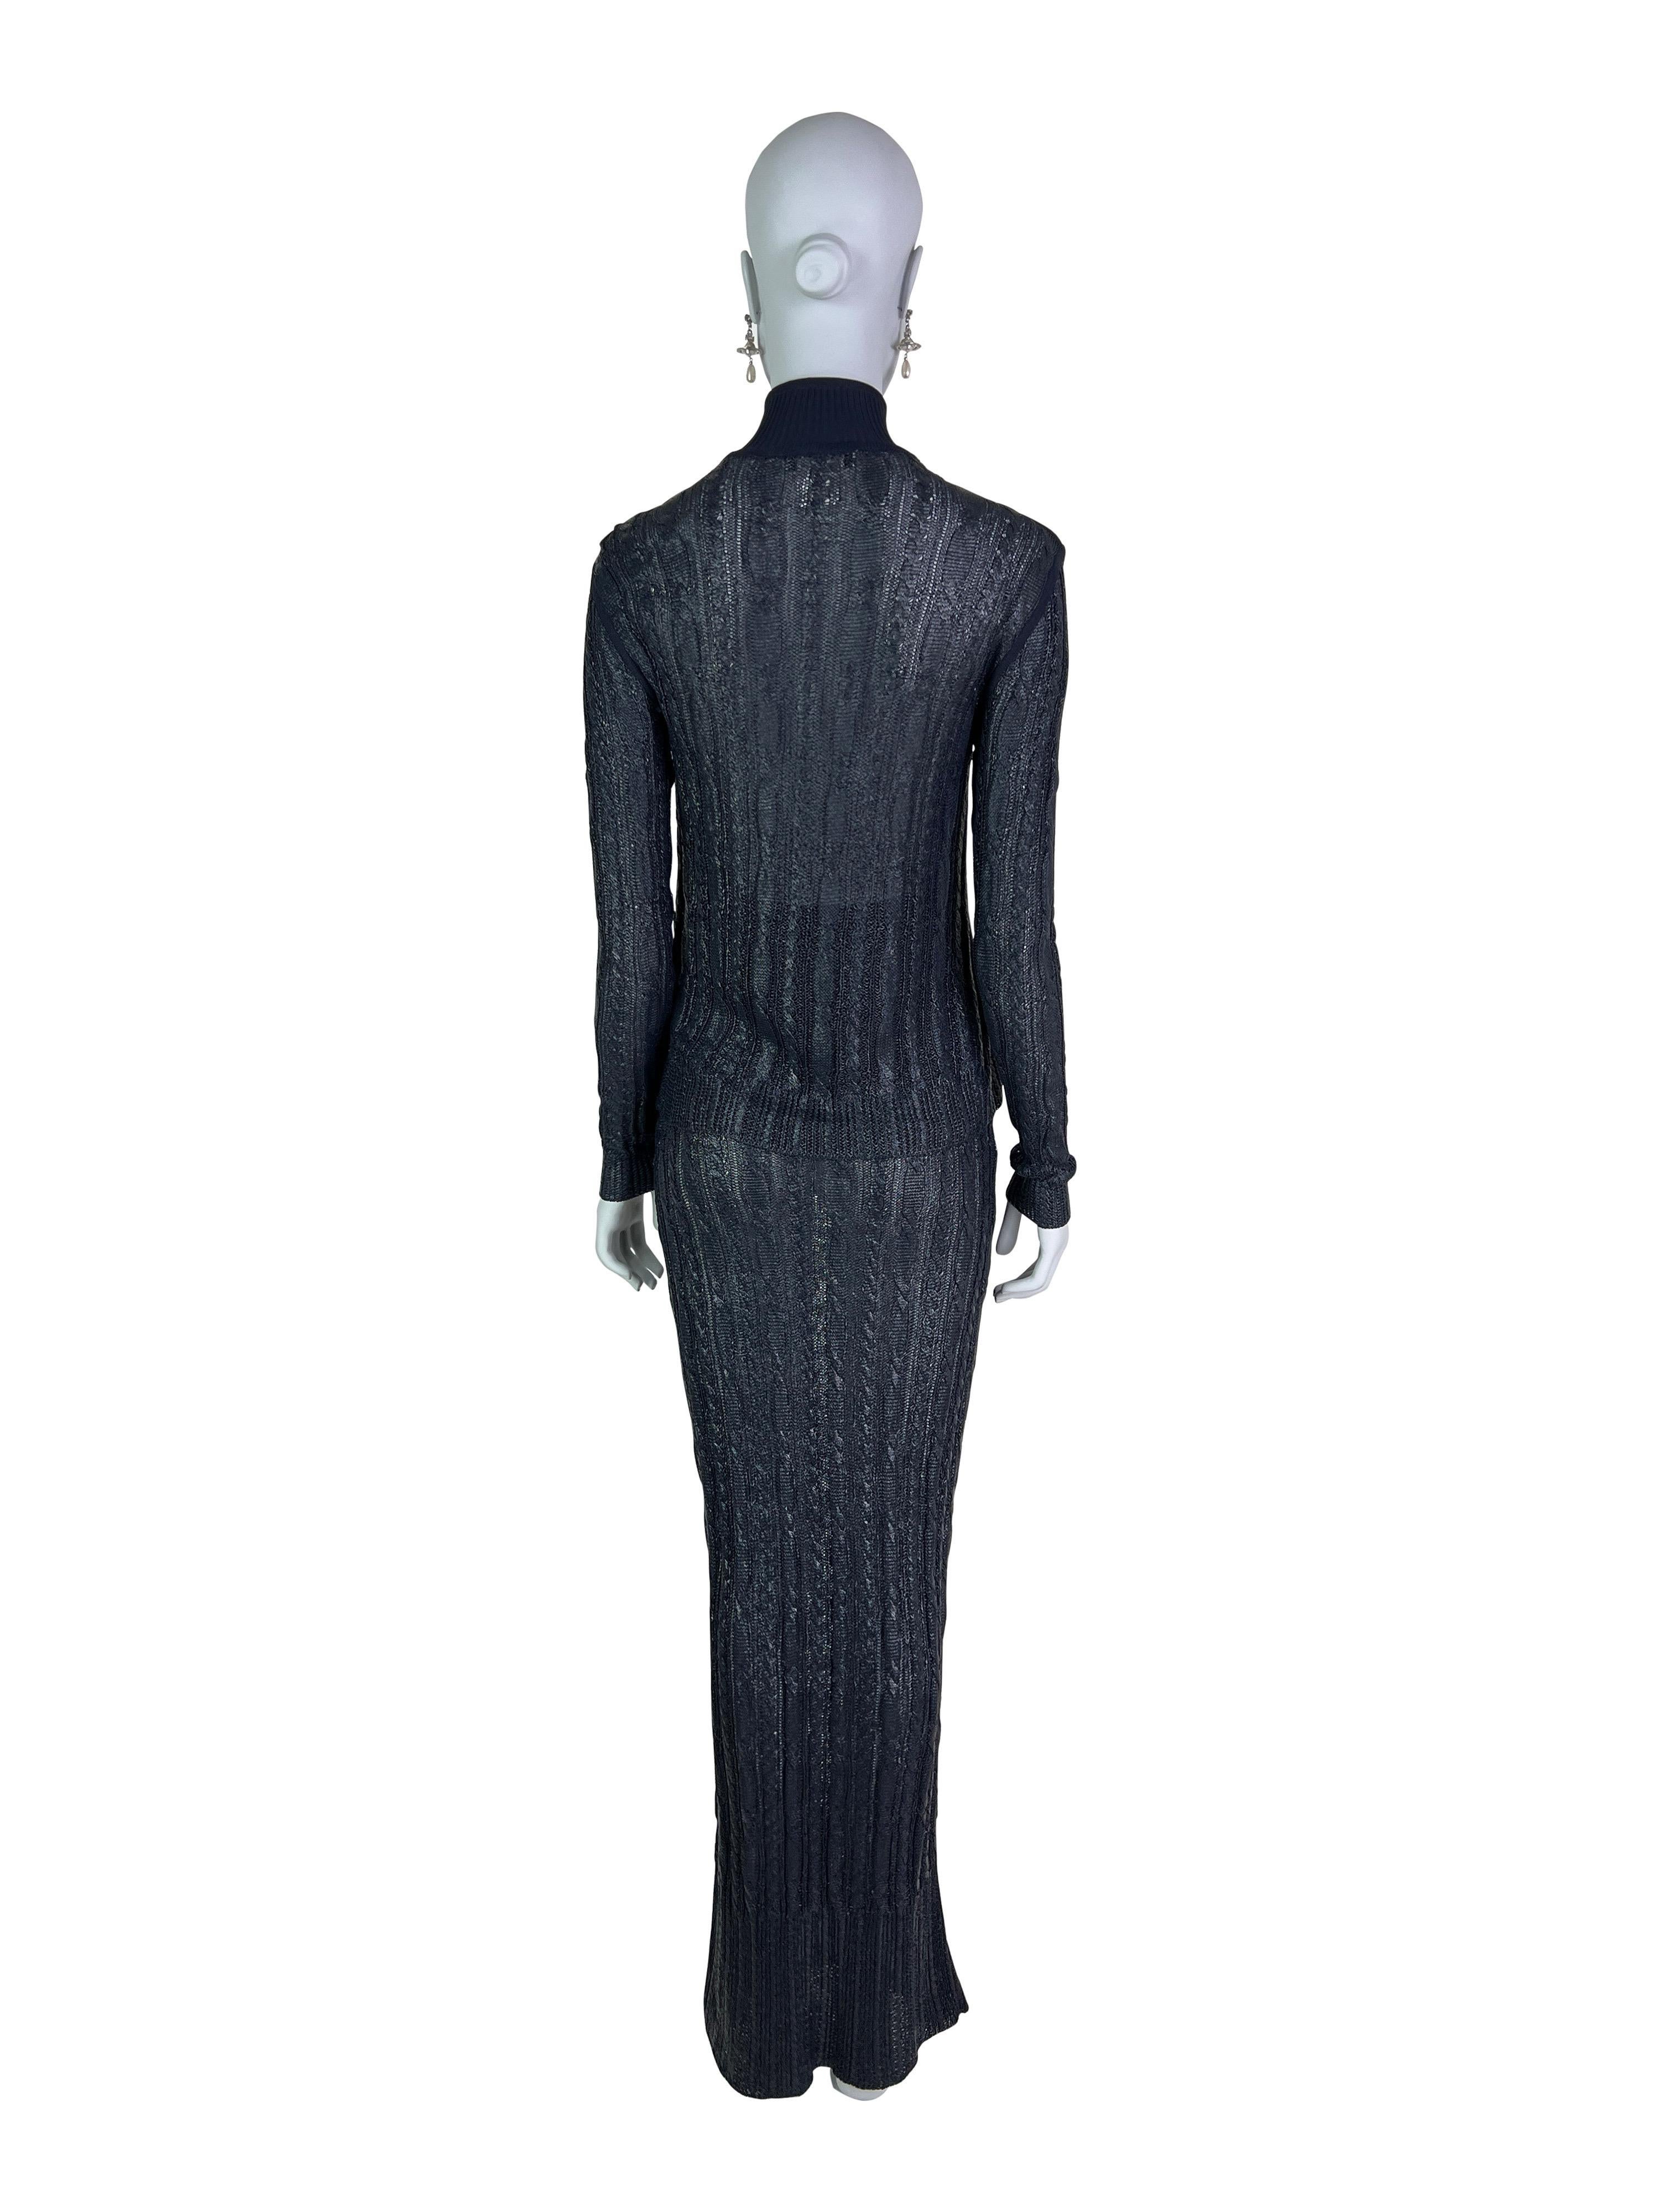 SS 1999 Dior by John Galliano RTW Rubber Knit 3-pieces ensemble For Sale 2